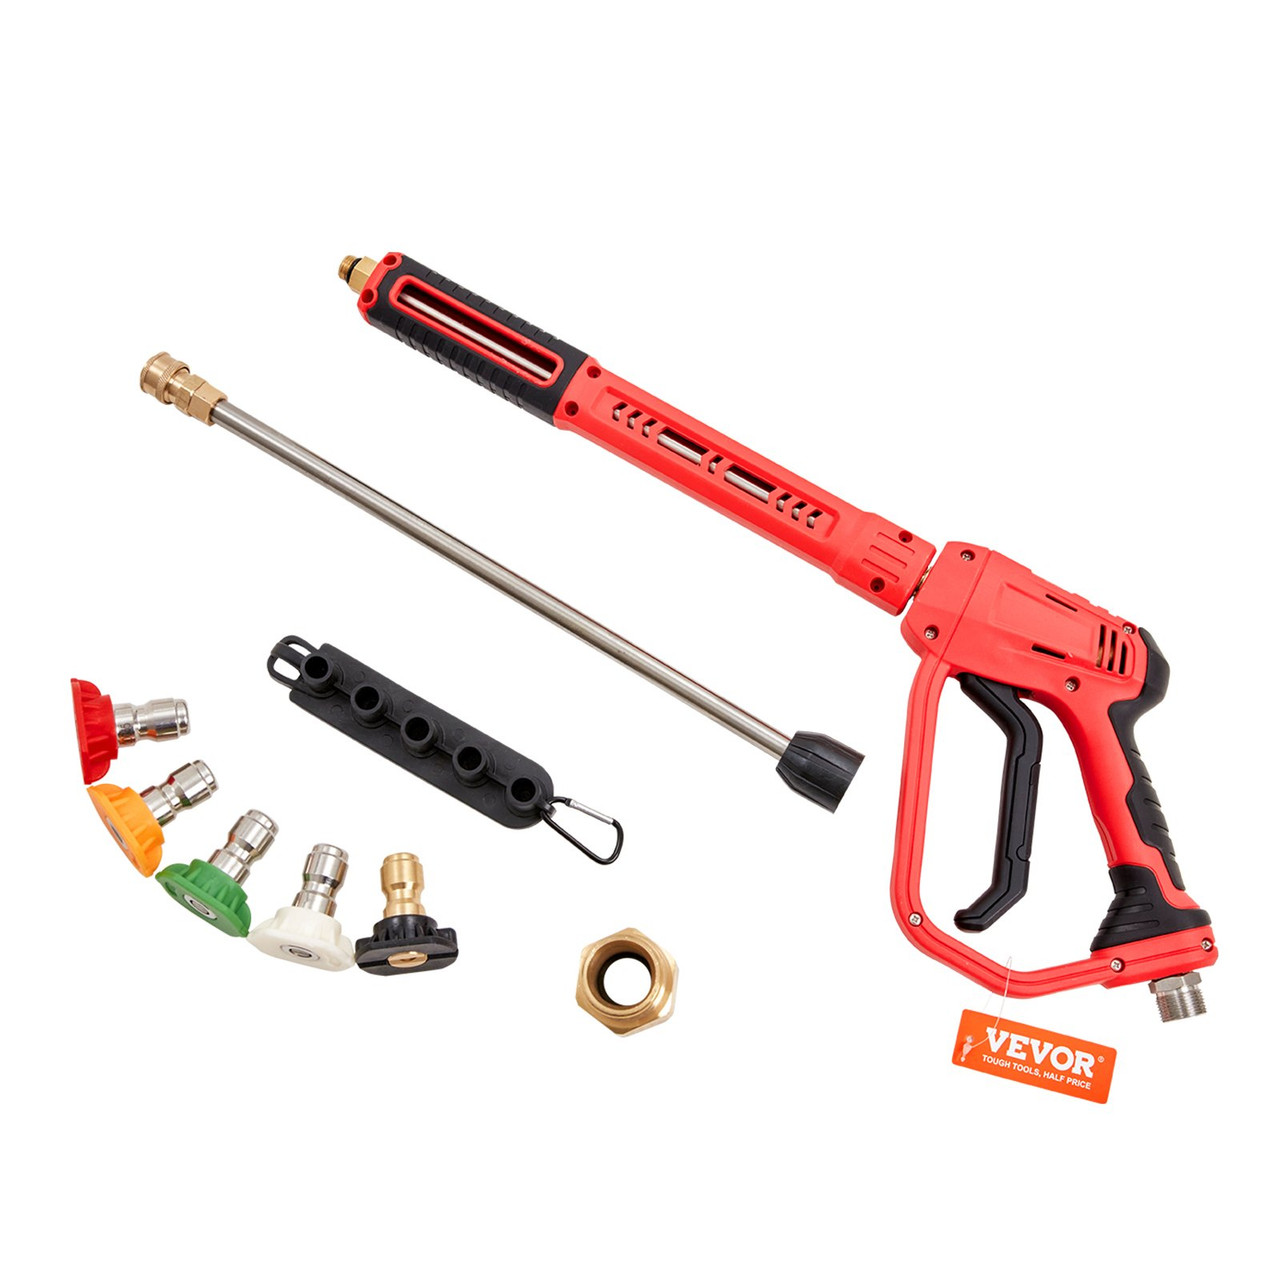 High Pressure Washer Gun, 4000 PSI, Power Washer Spay Gun with Replacement Extension Wand, M22-14mm Inlet & 1/4'' Outlet Hose Connector Foam Gun, Pressure Washer Handle with 5 Nozzle Tips